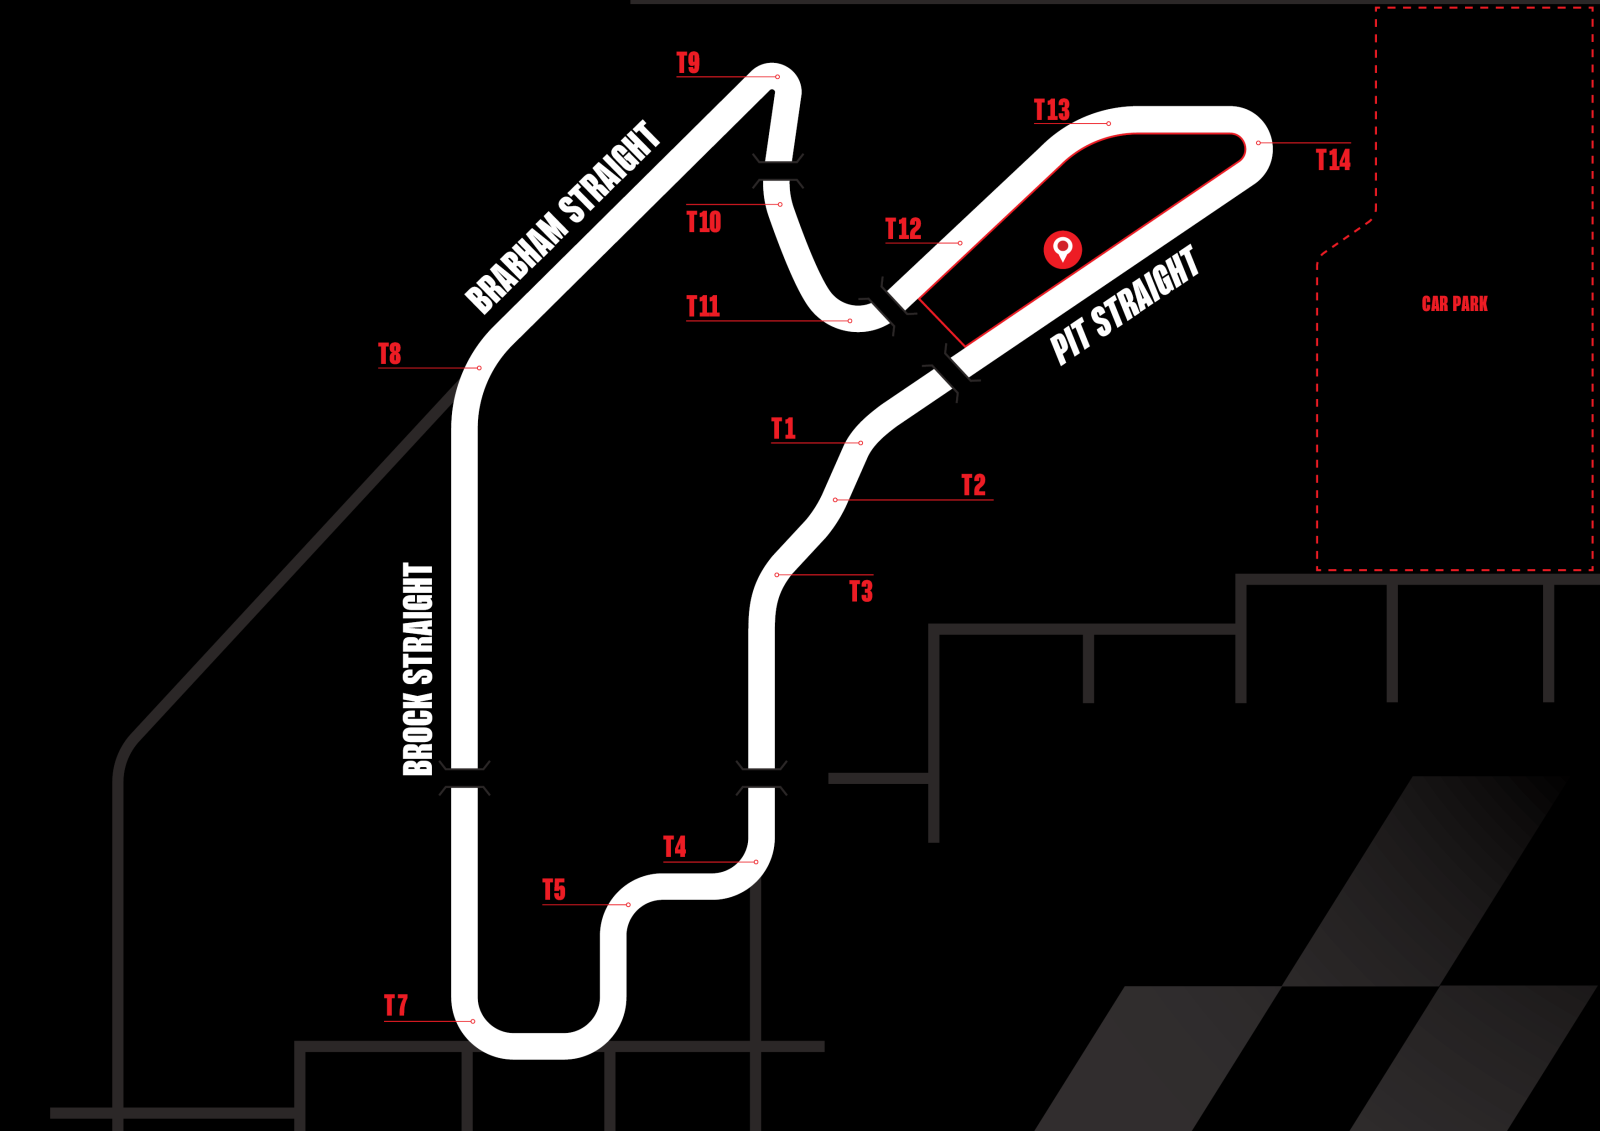 The Drivers Lounge track location map